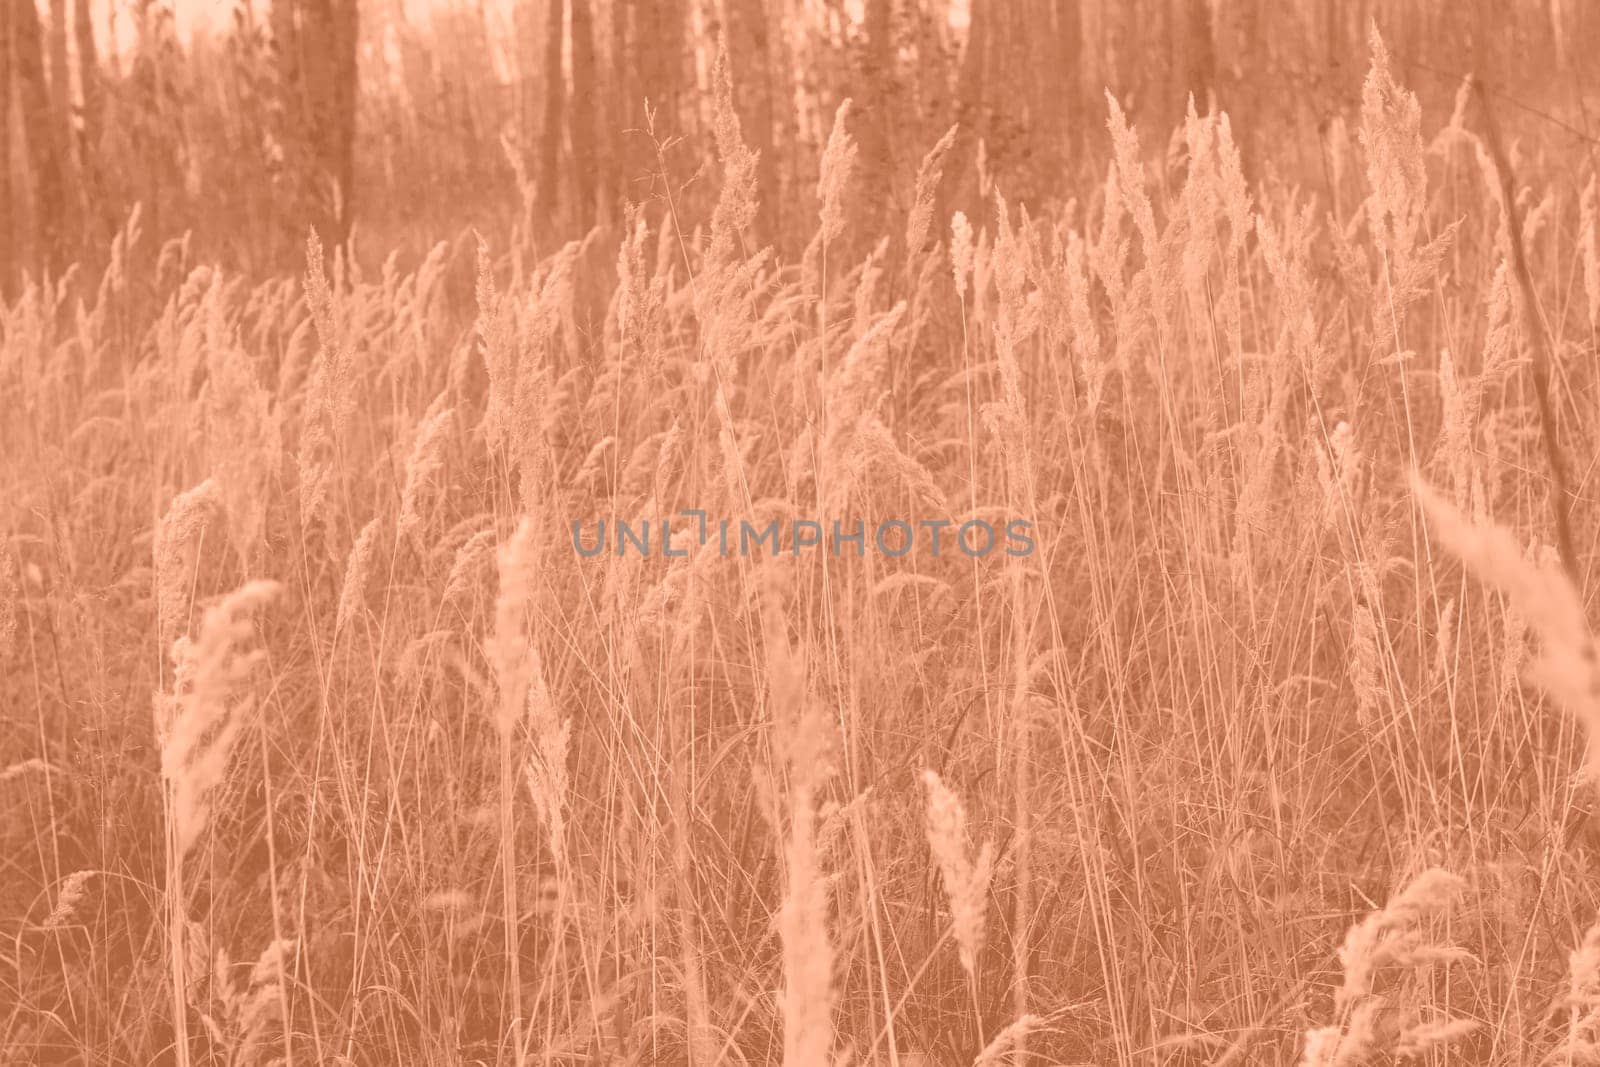 Peach Fuzz grasses with spikelets of beige color close-up. Abstract natural background of soft plants monochrome color 2024. by kizuneko